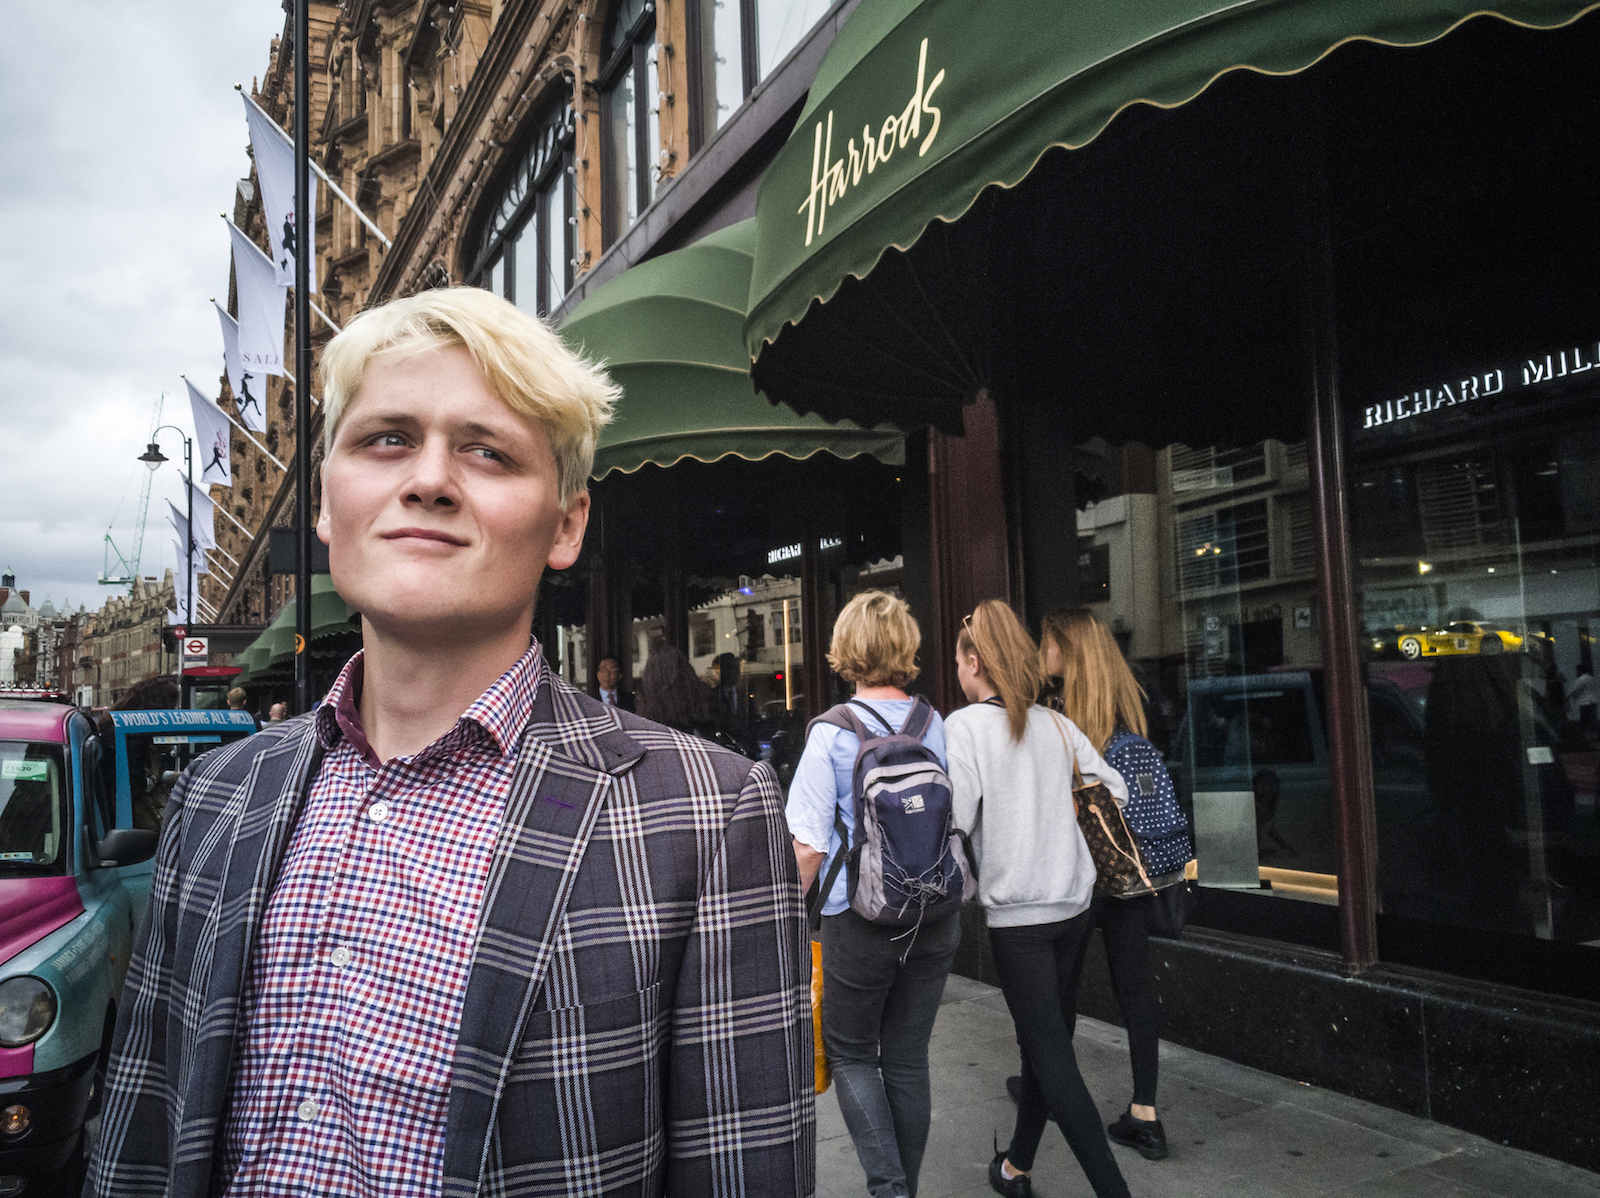 I Tested The Harrods Dress Code By Dressing Like A Complete